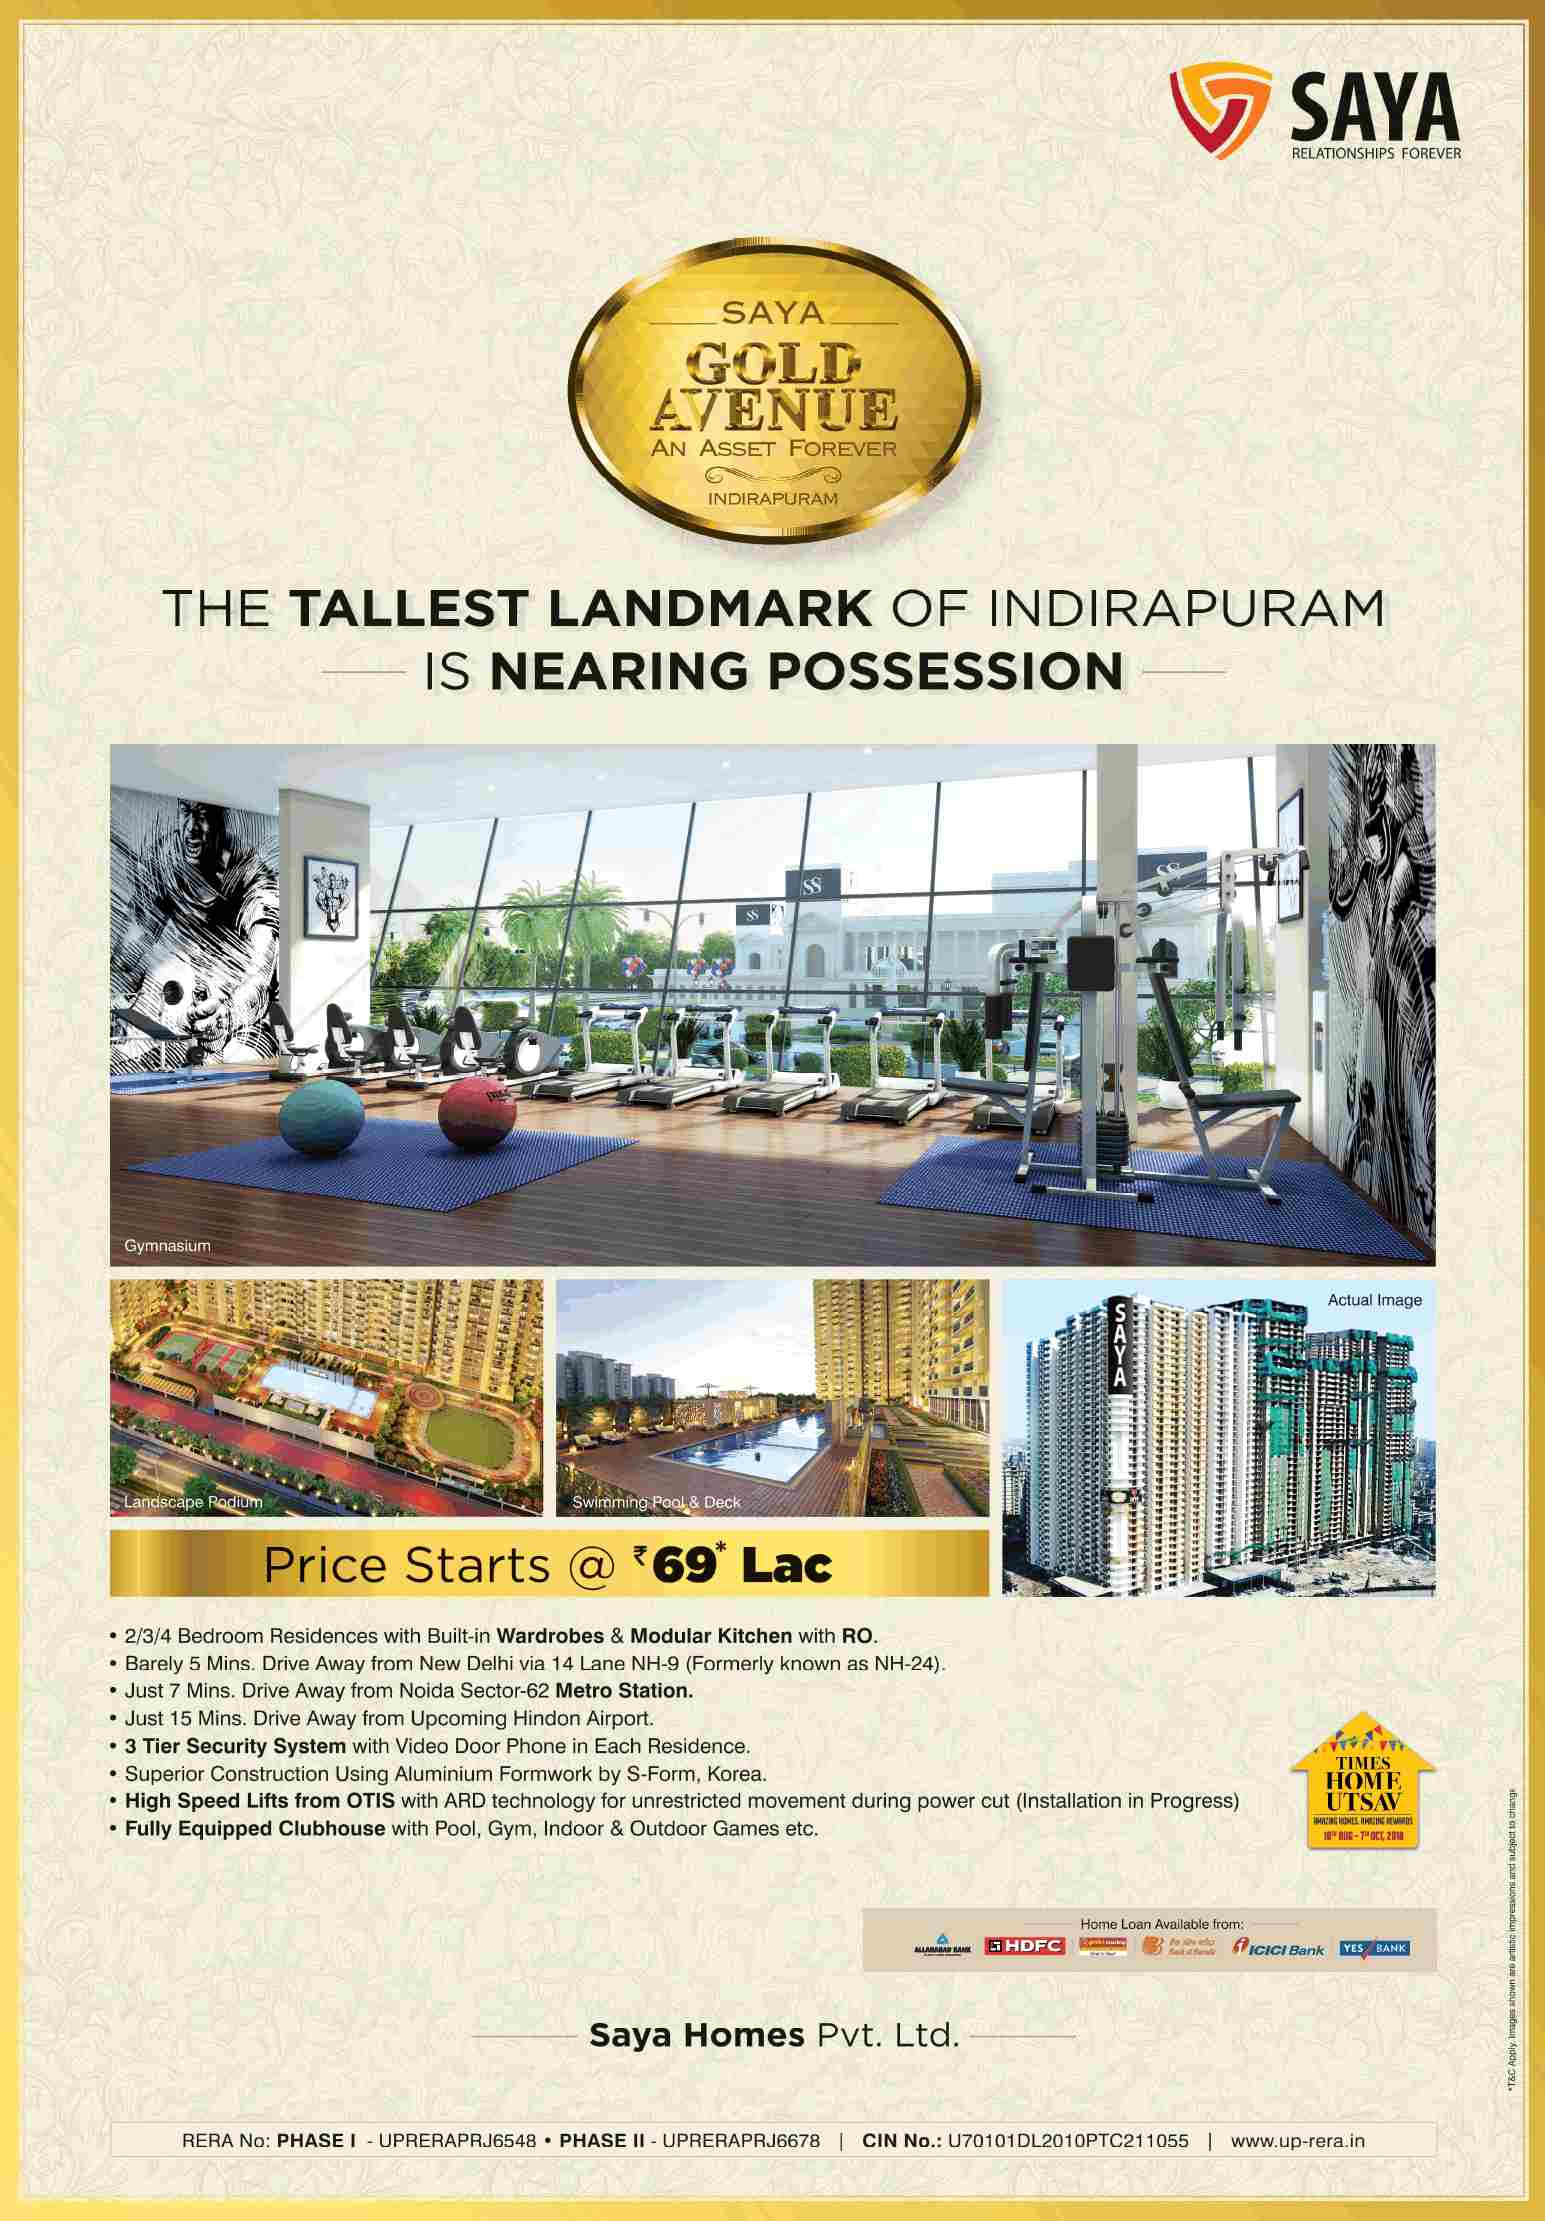 Book homes @ Rs. 69 Lacs onwards at Saya Gold Avenue in Ghaziabad Update